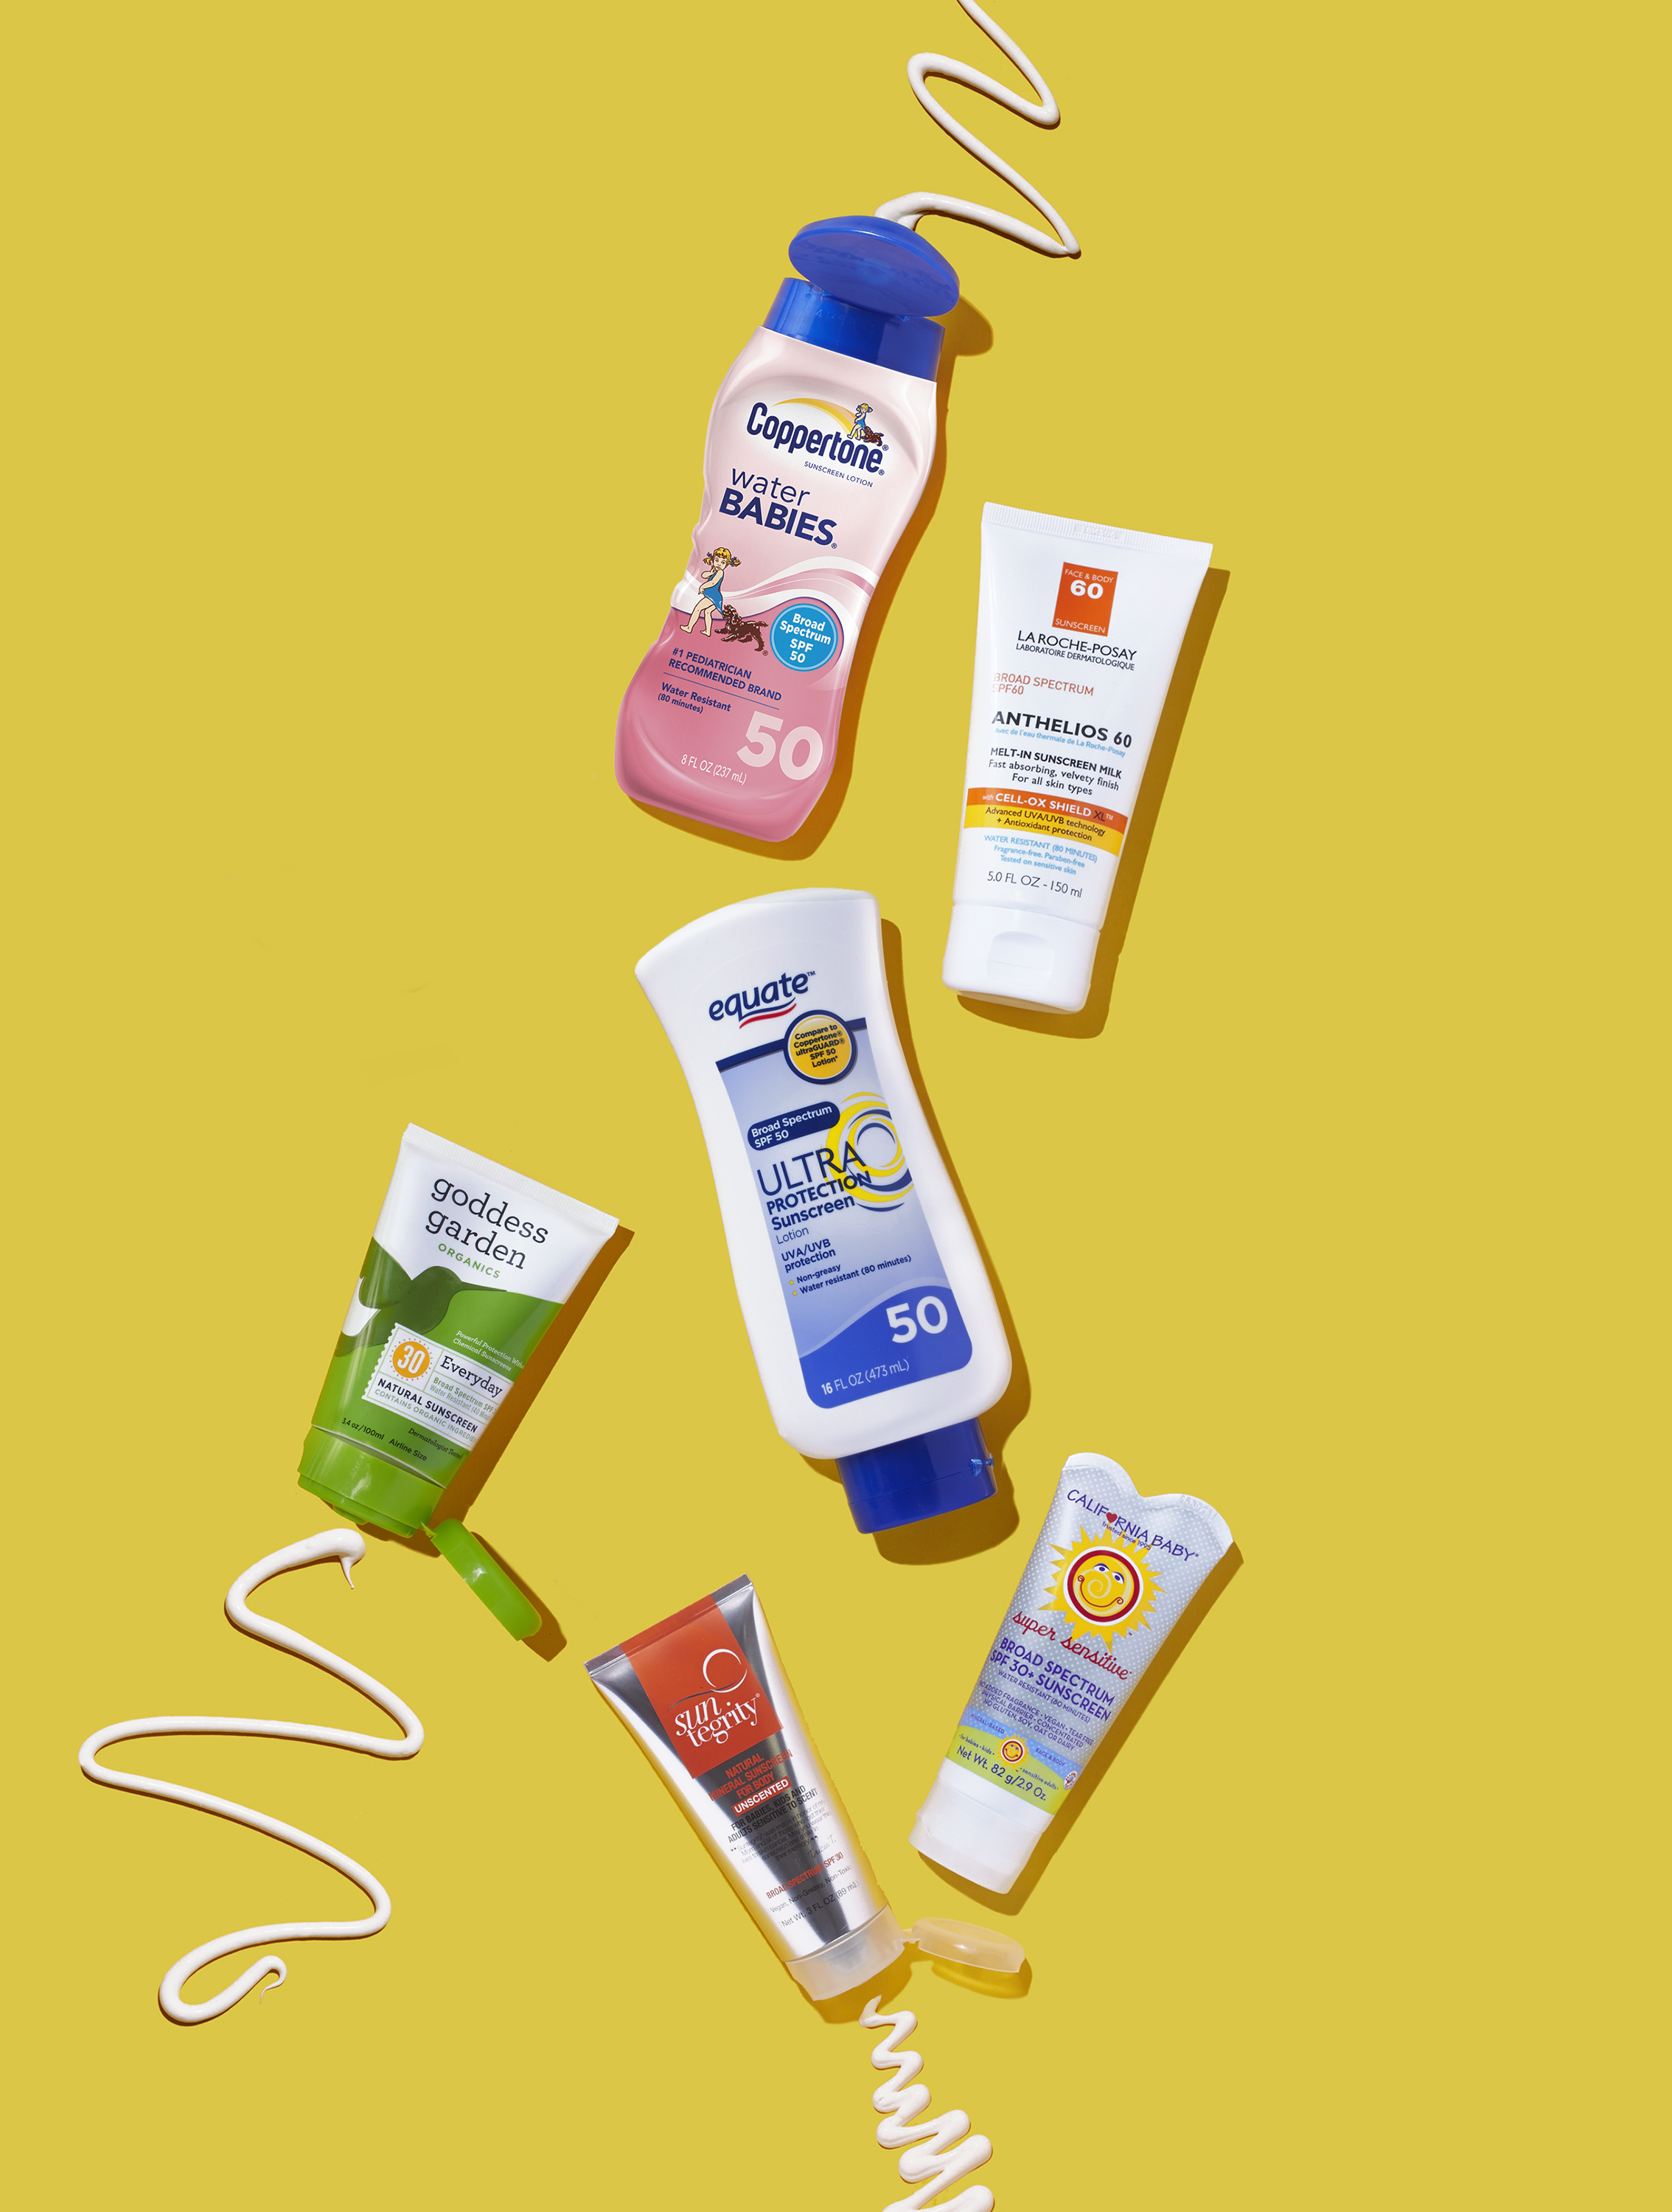 Top sunscreens are put to the test.